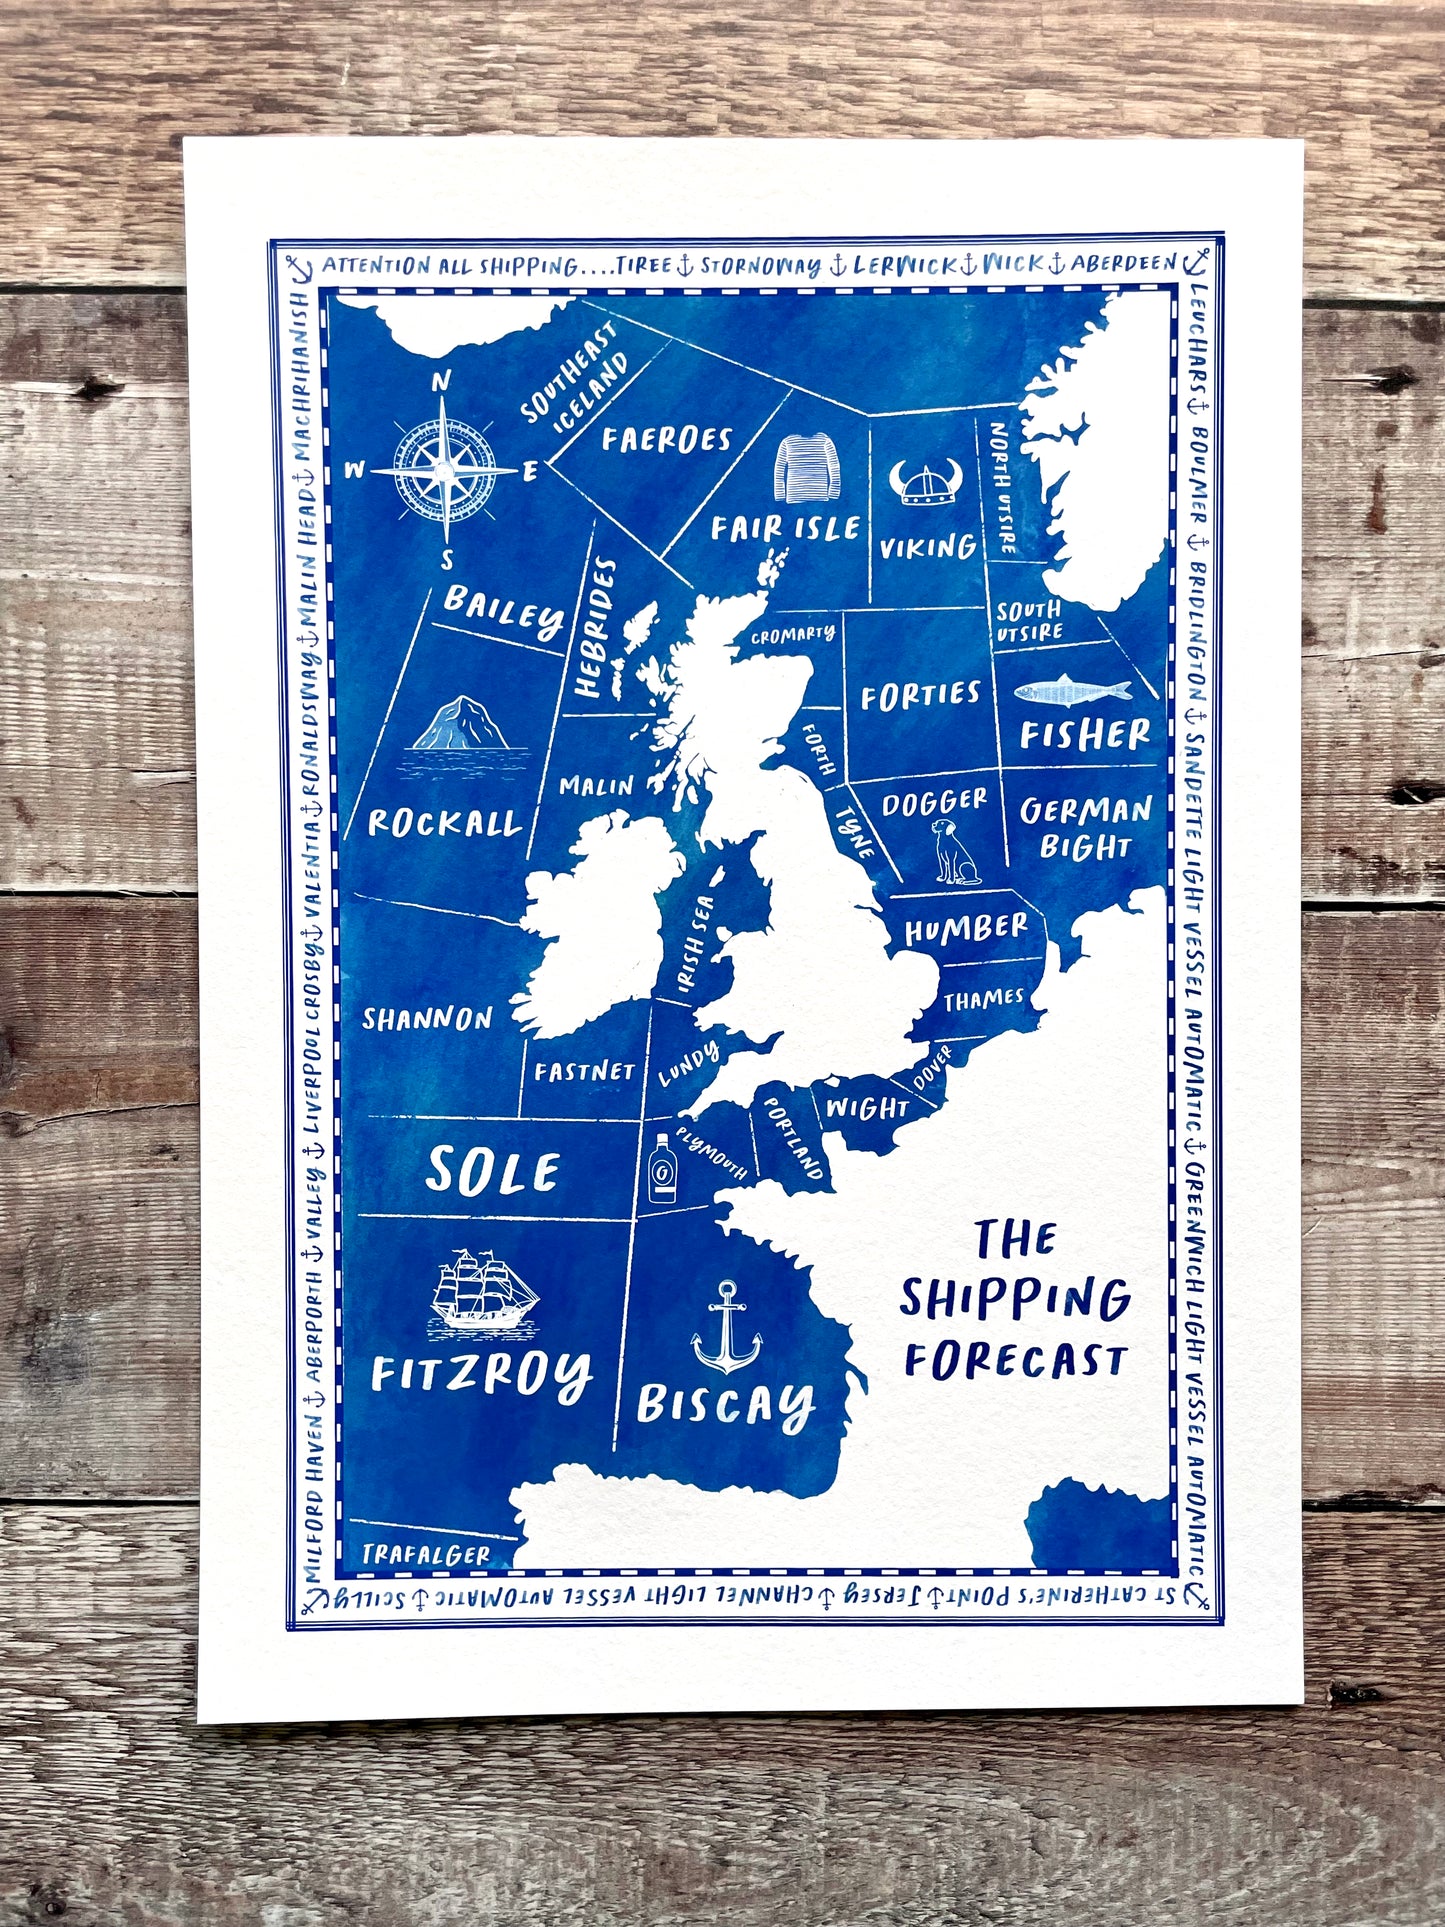 The Shipping Forecast limited edition print